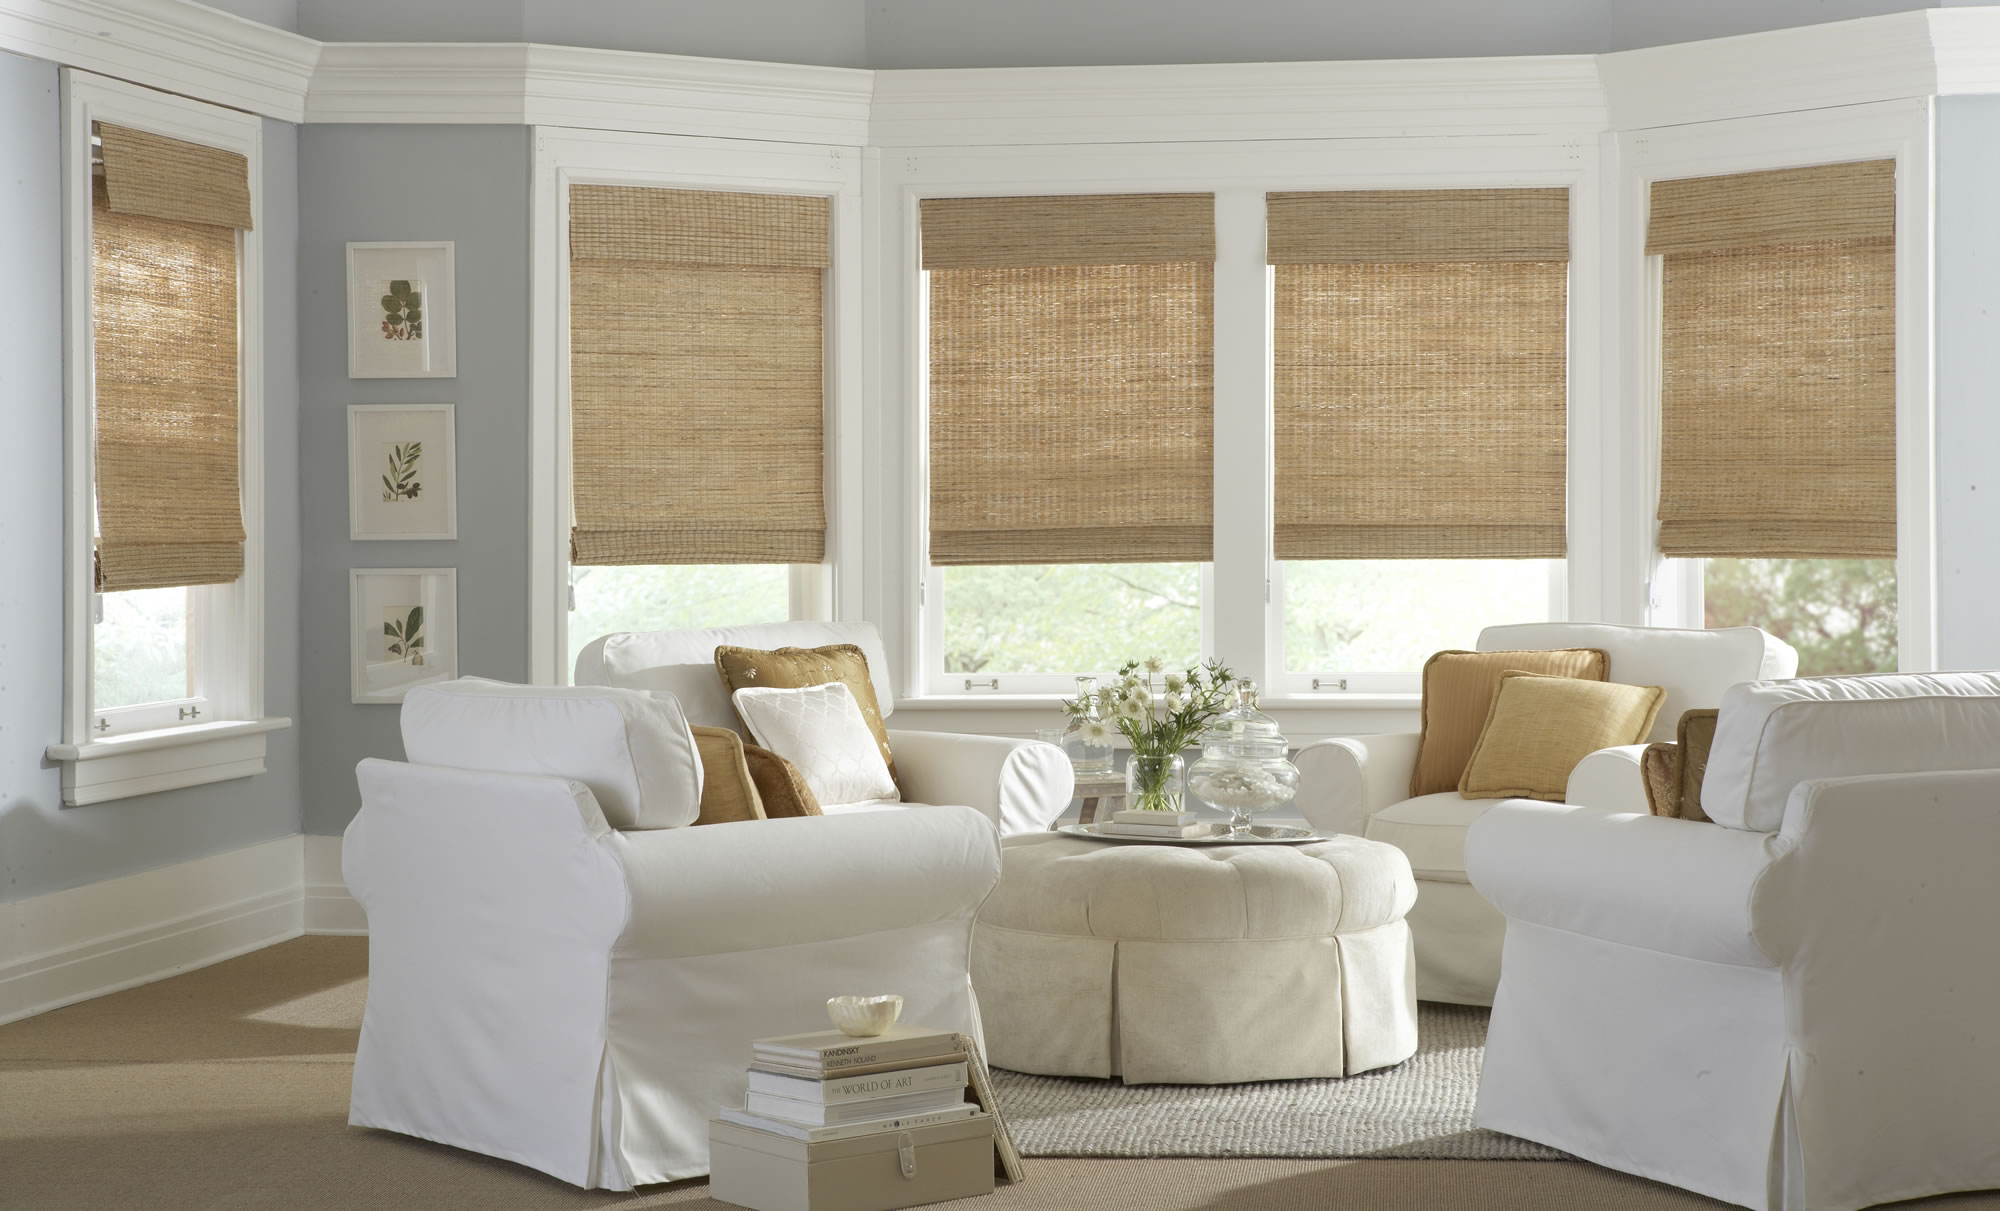 Top Benefits of Bamboo Blinds & Why We Love Them - Behind the Blinds